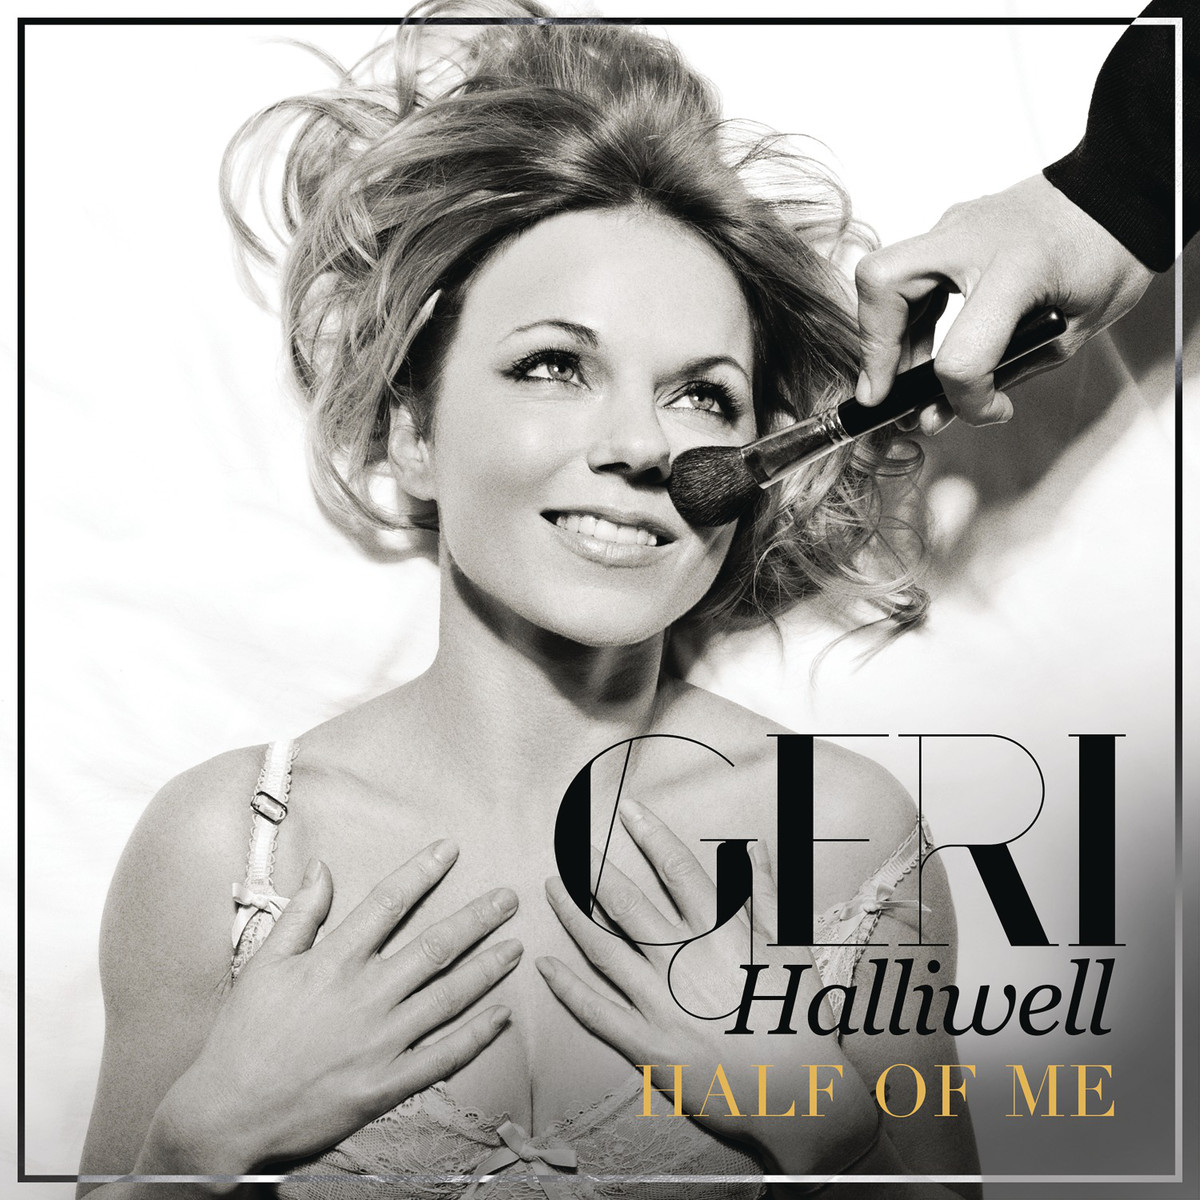 News Added Sep 15, 2013 Geri Halliwell (aka Ginger Spice) signed a record deal with Sony Music. Her new single "Half Of Me" is officially announced to be released on October 25th and has been co-written and produced by the boys from Sydney duo DNA, who've previously worked with the likes of Ricky Martin, Tina […]